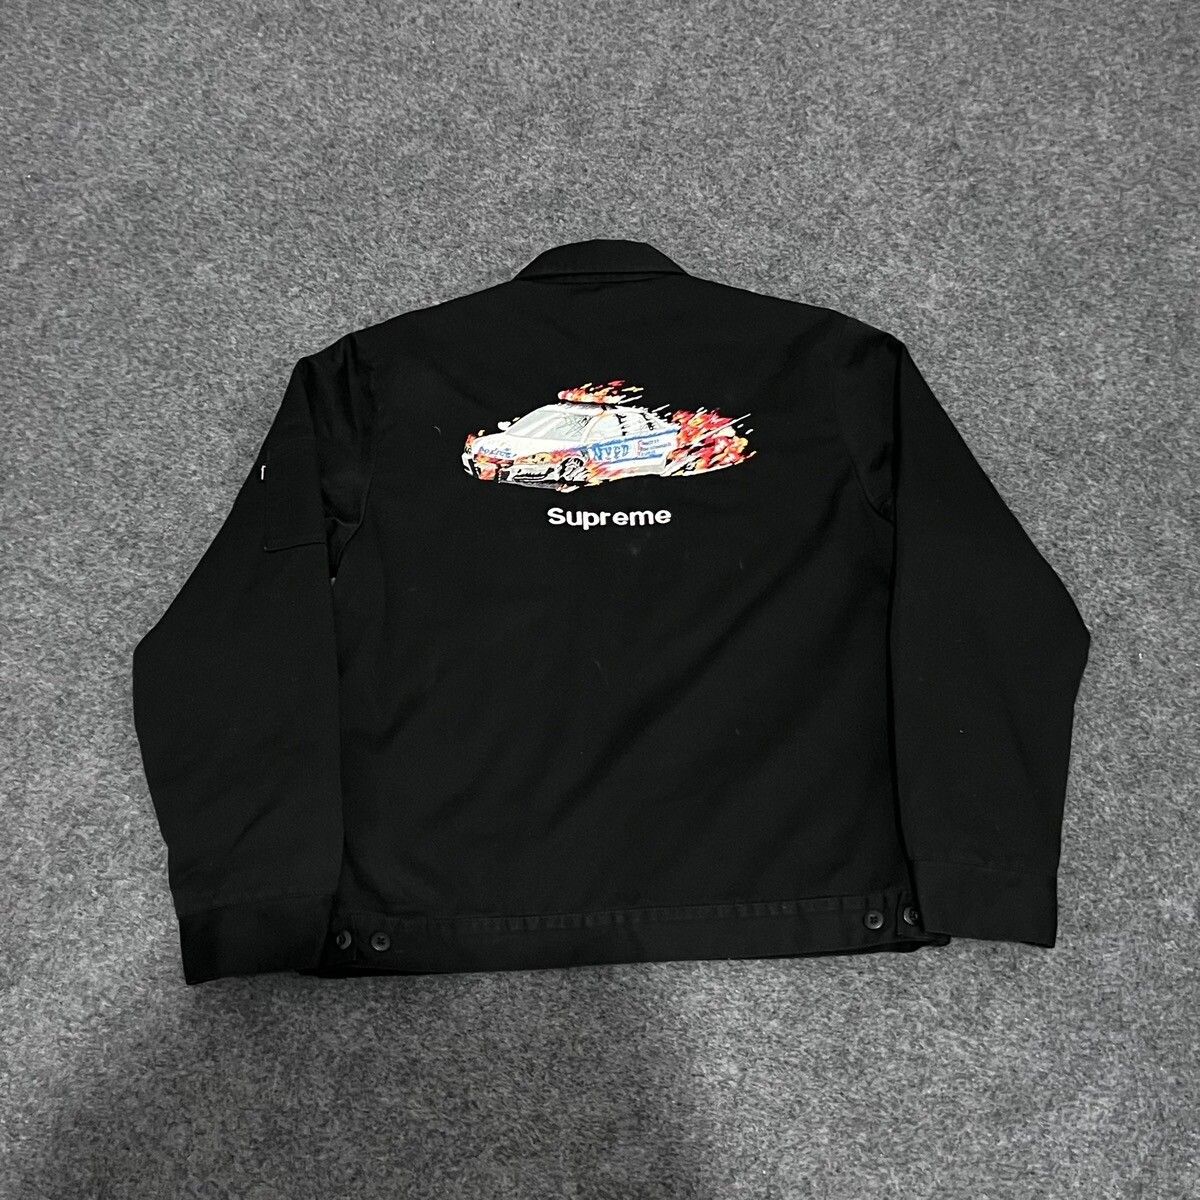 outlet here Supreme Cop Car Embroidered Work Jacket | www.fcbsudan.com